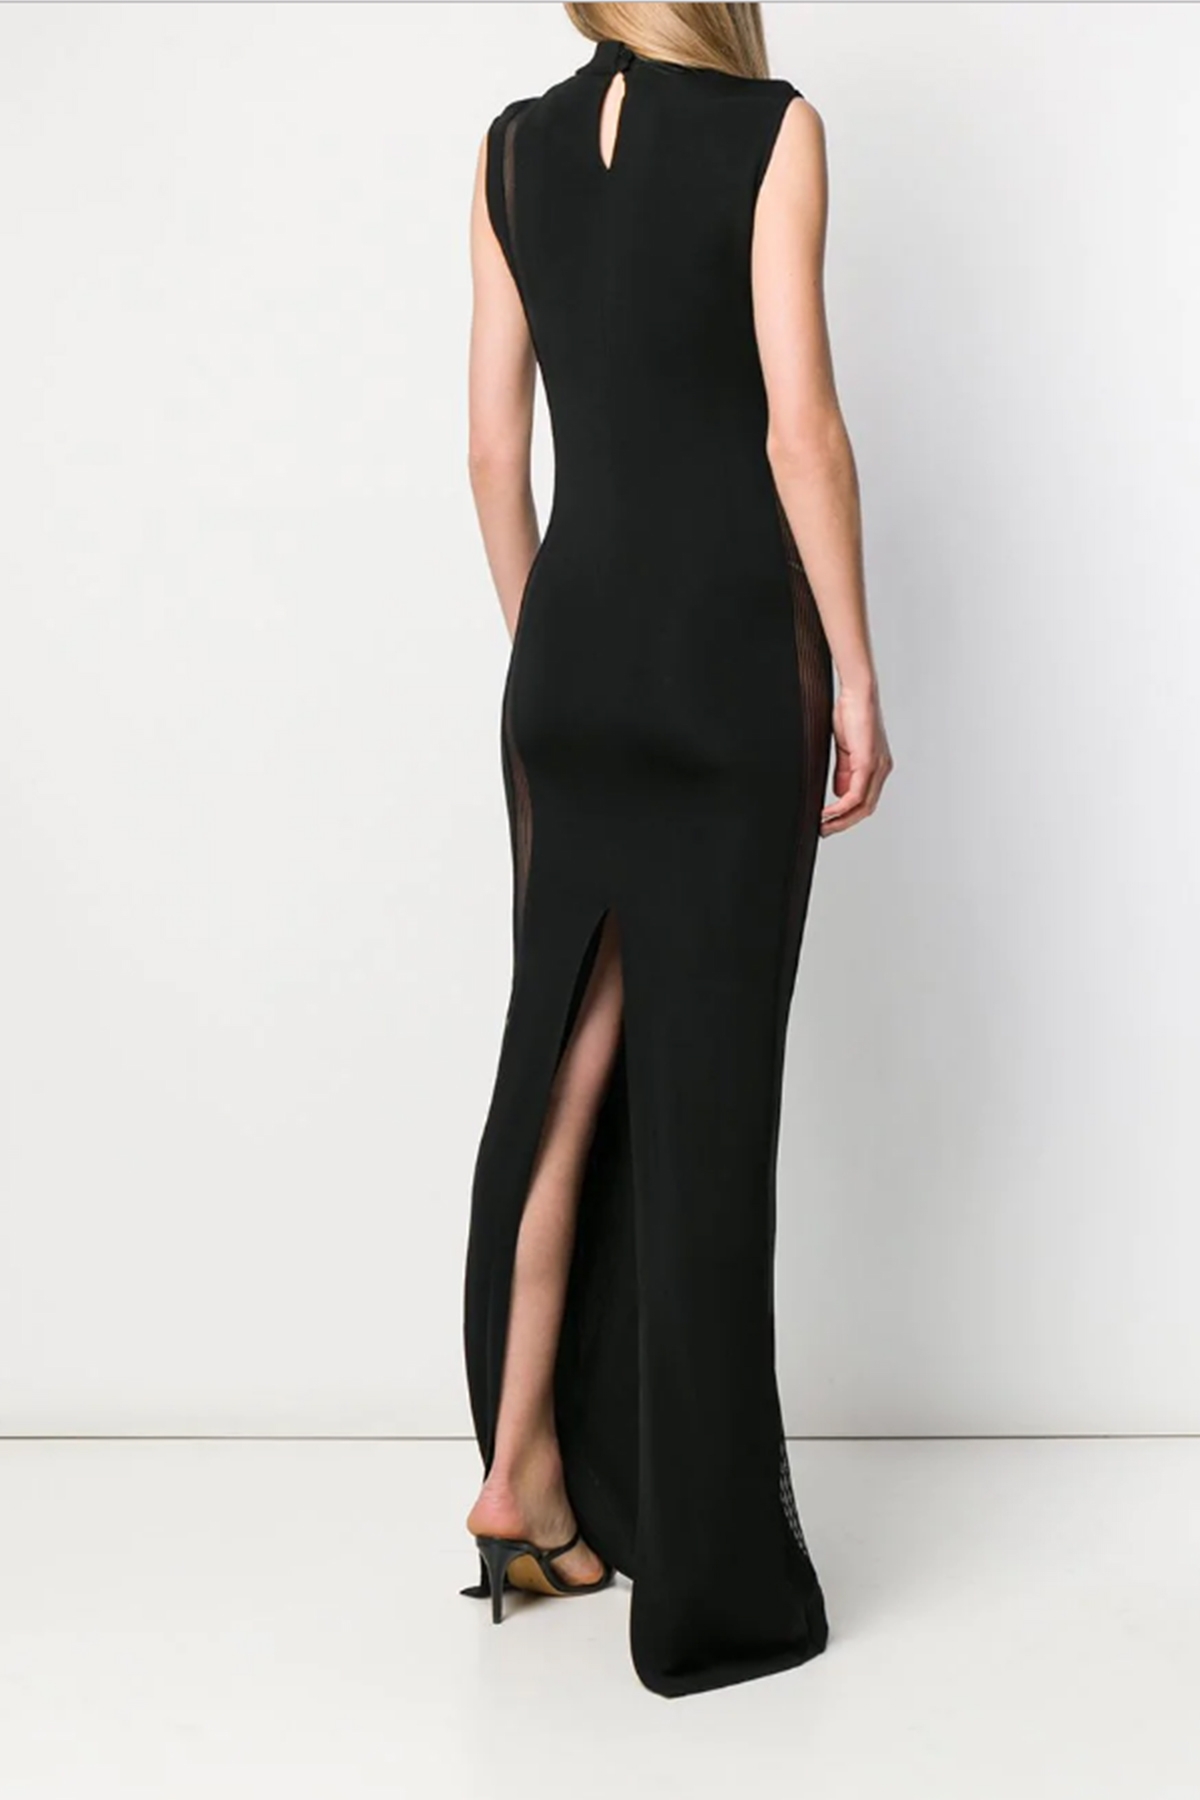 FITTED MAXI DRESS - STYLAND